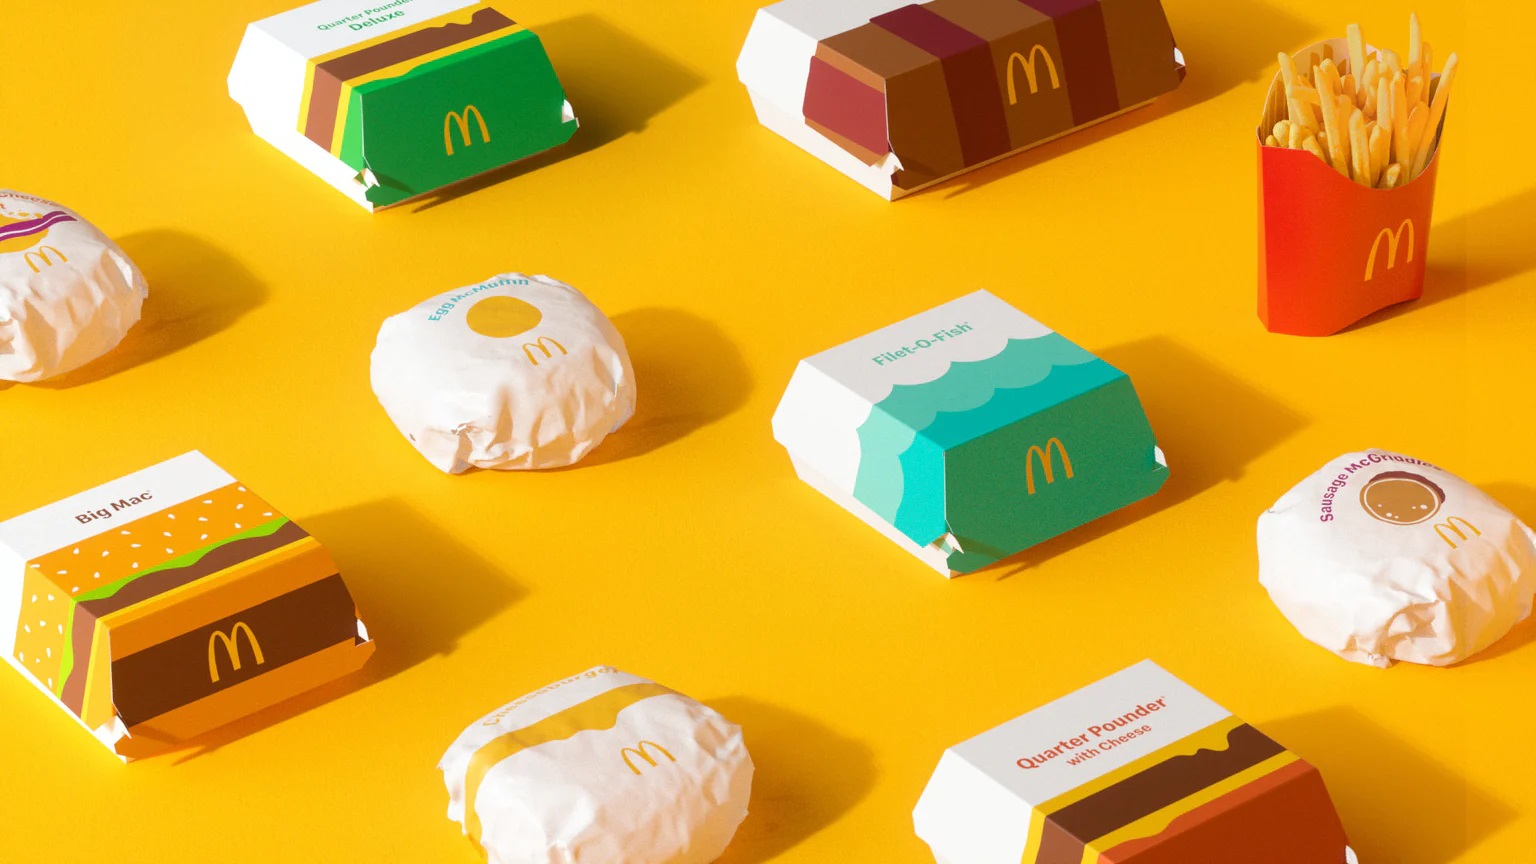 McDonald’s launches playful redesign of its packaging